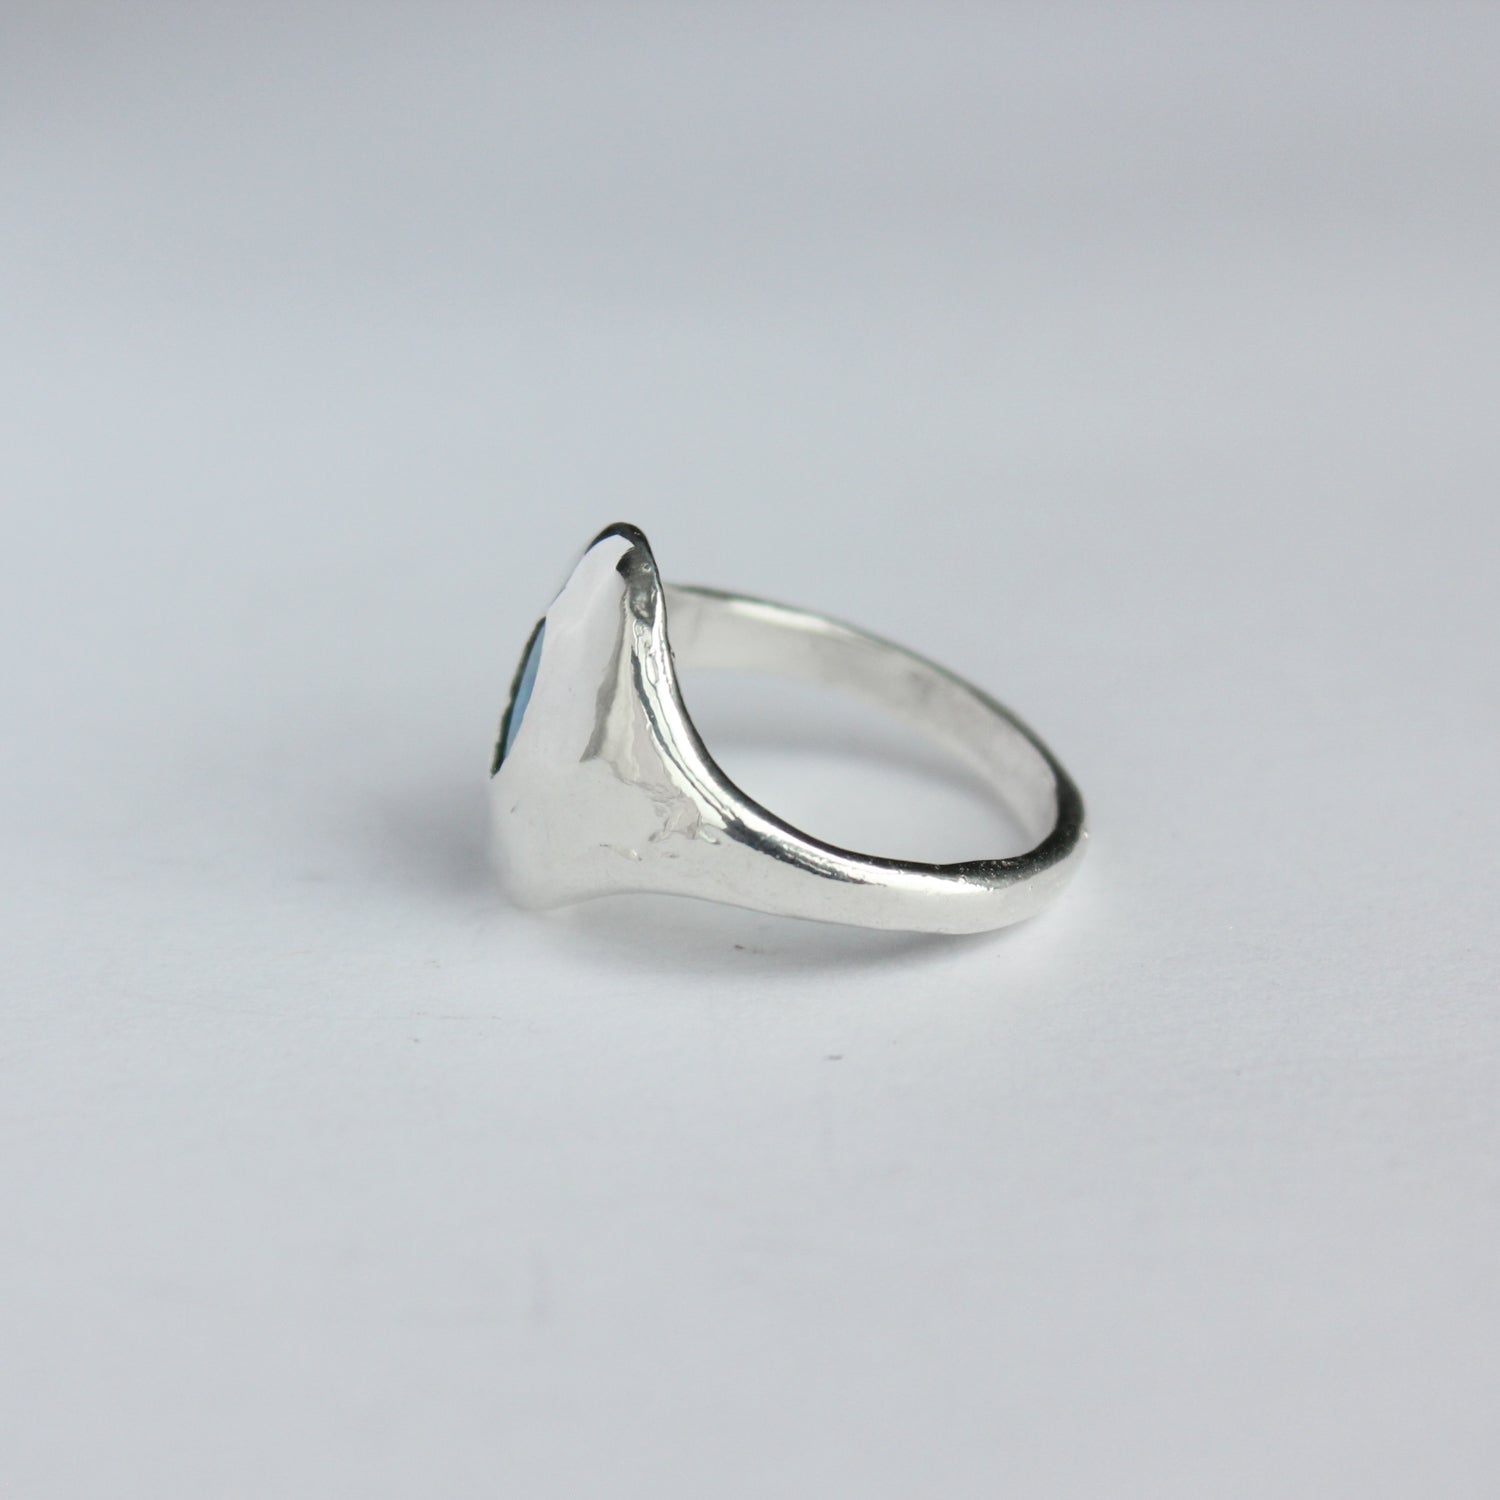 Shield Ring - Size 6.5